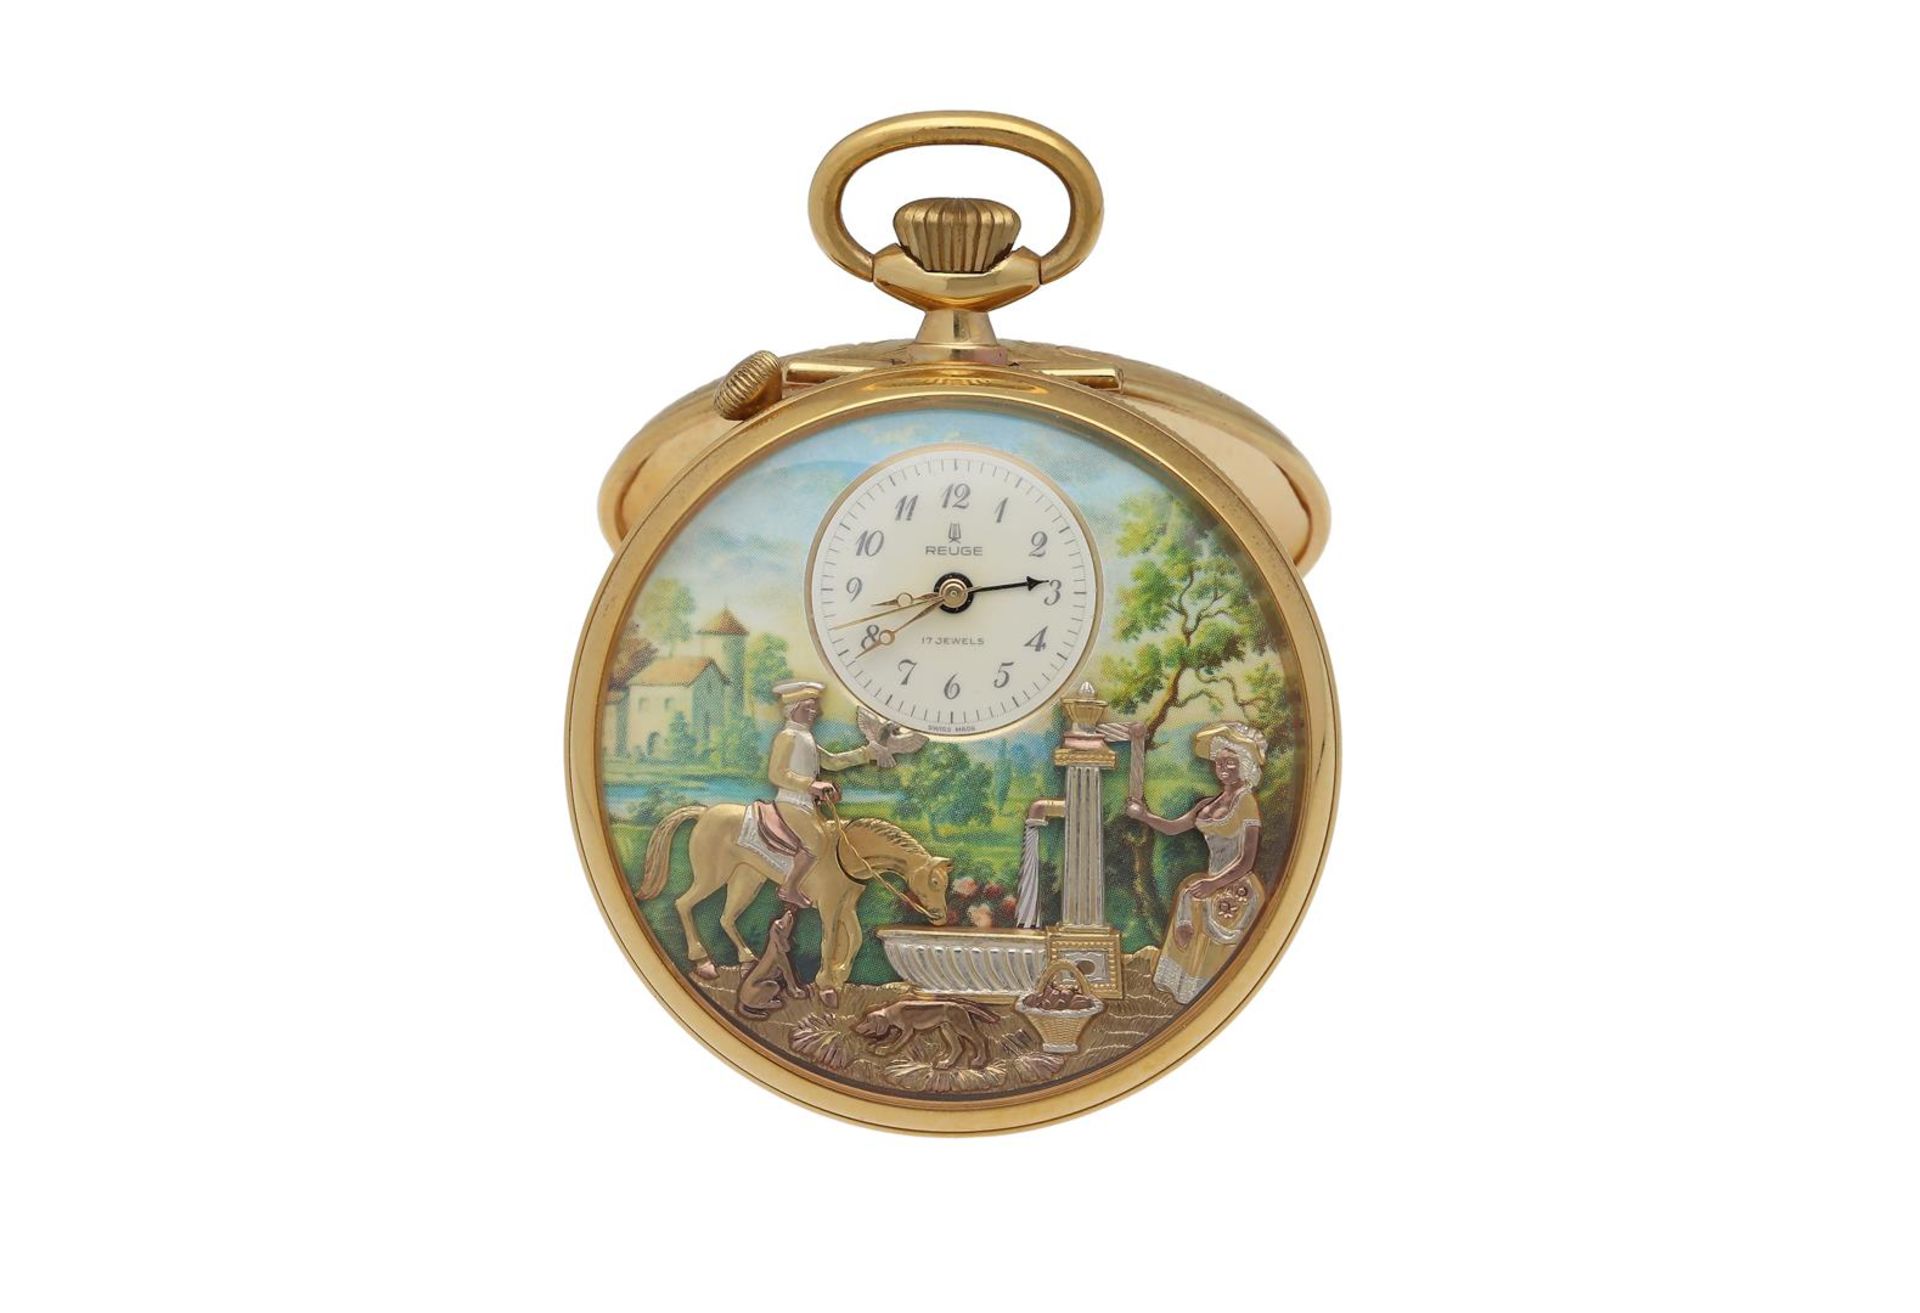 Charles Reuge, gold plated automaton musical pocket watch,'The Fountain'.
D: 57 mm